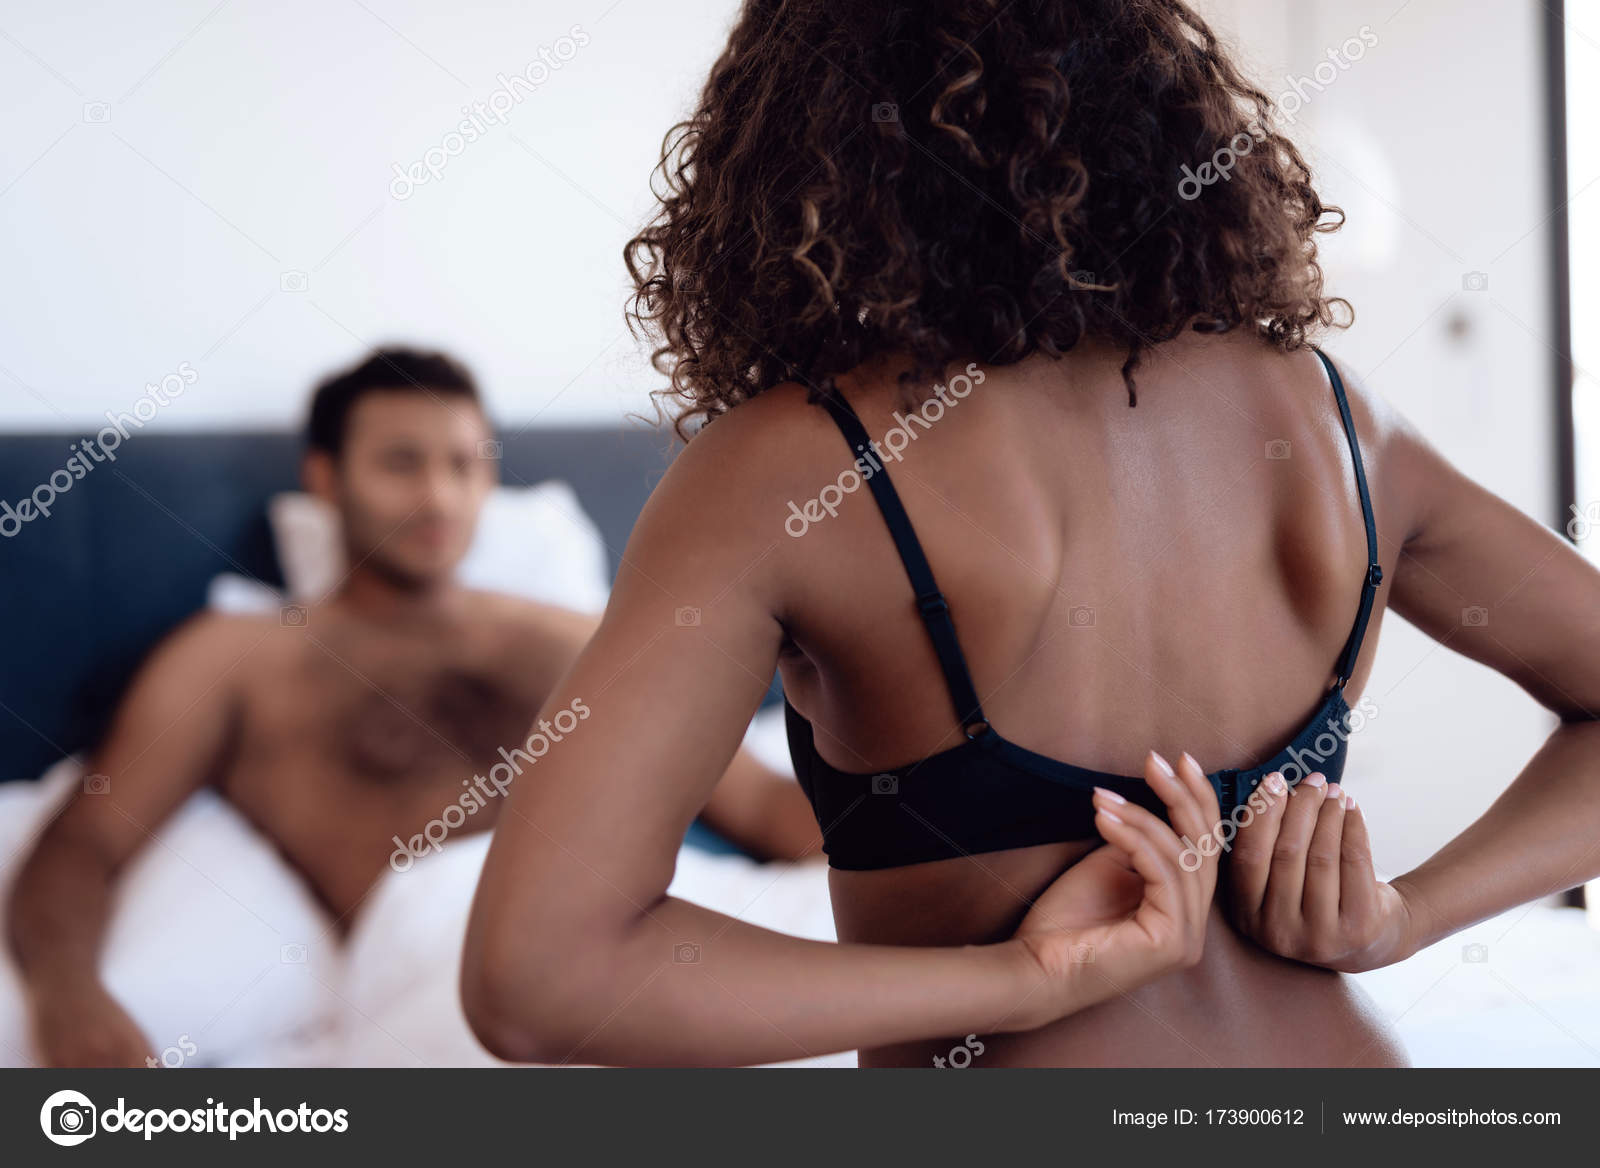 The man is lying on the bed and the woman is approaching him erotically picture